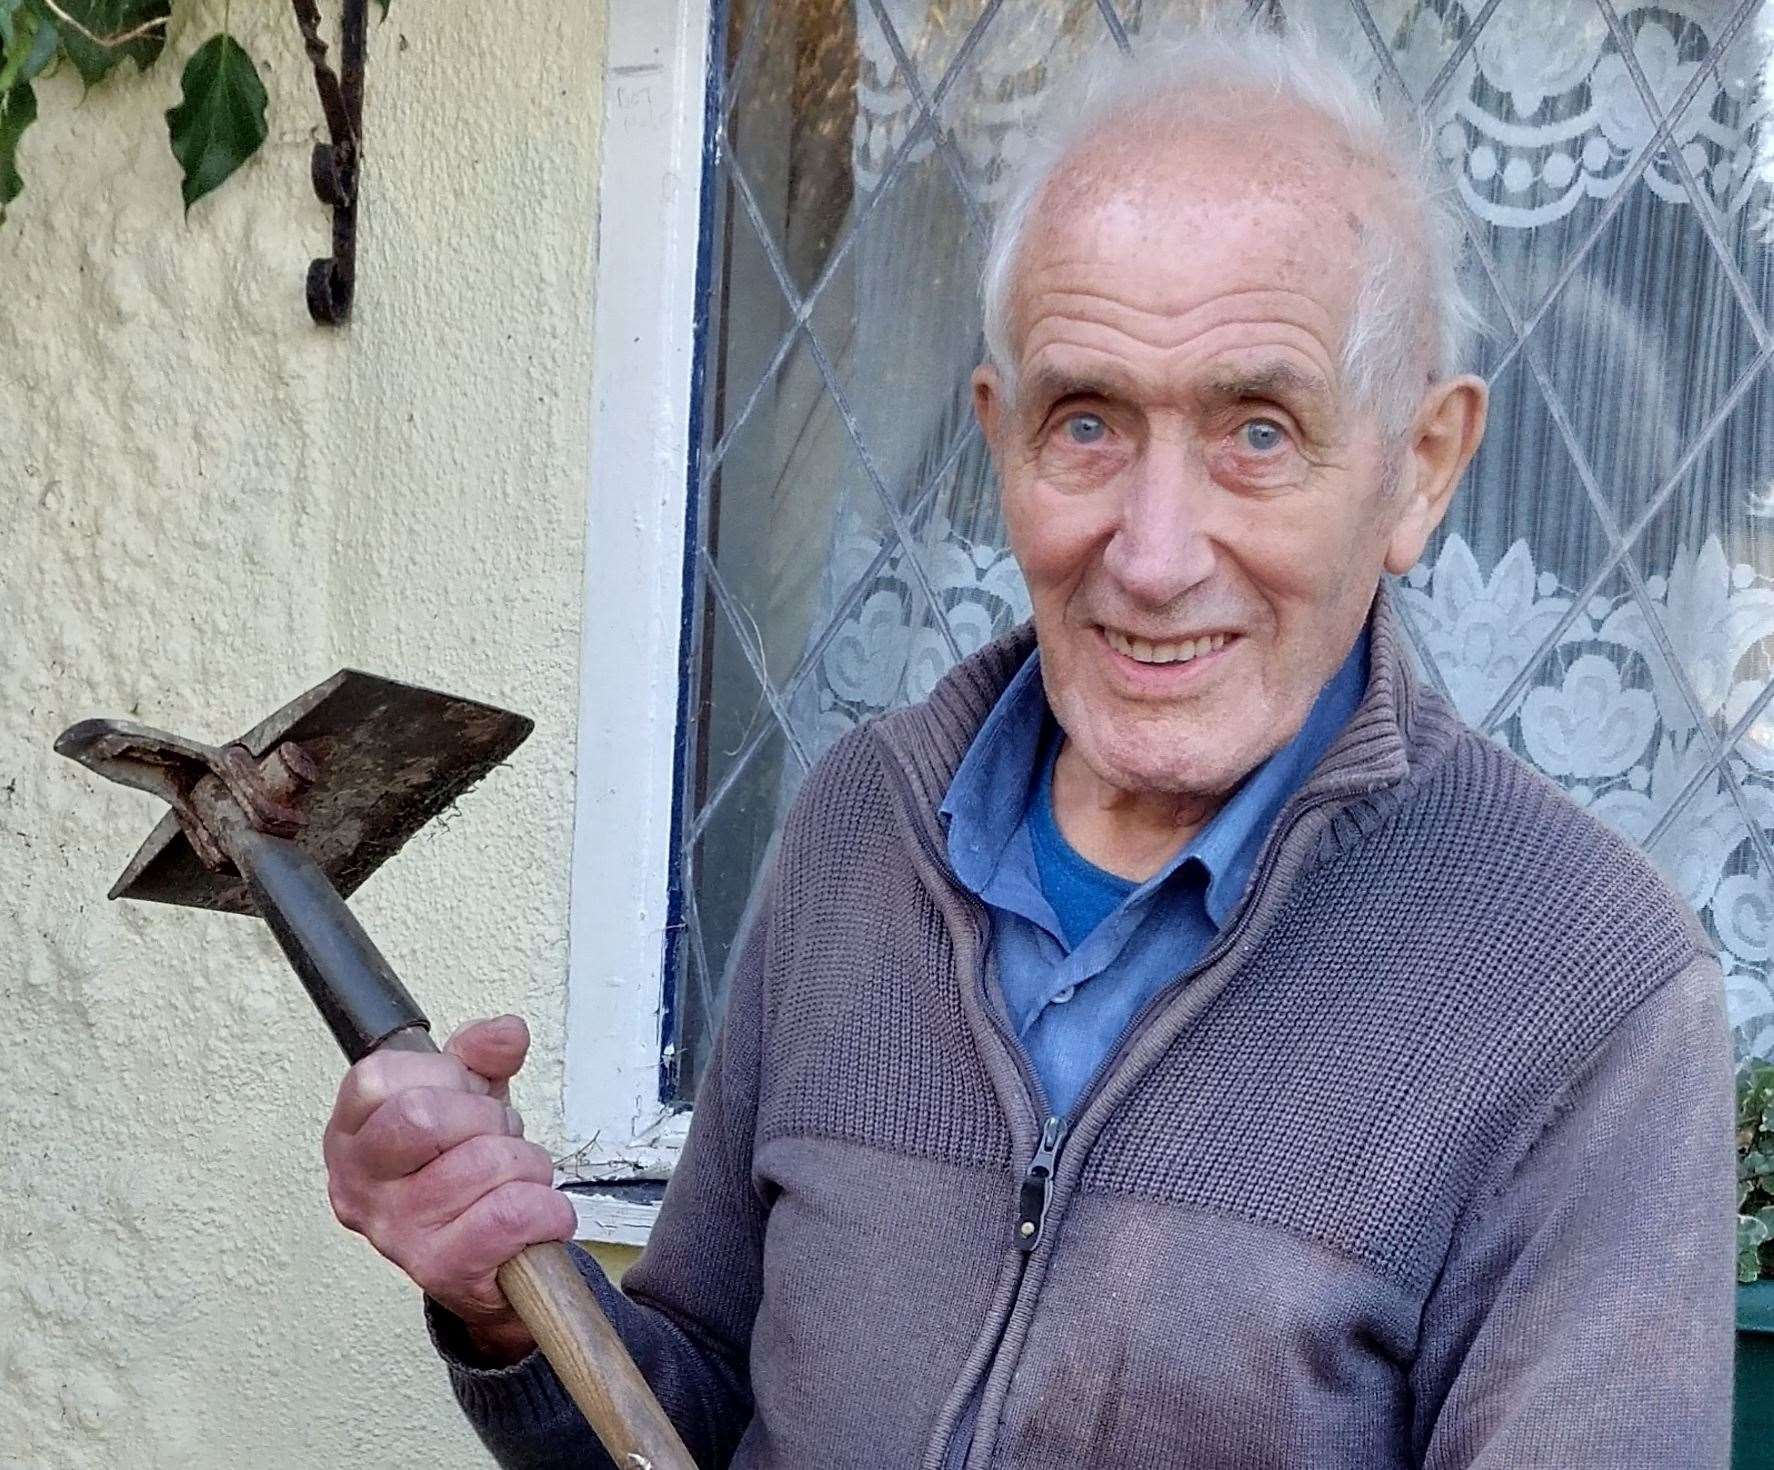 Alfred Eyles saw off a burglar from his home in Herne Bay